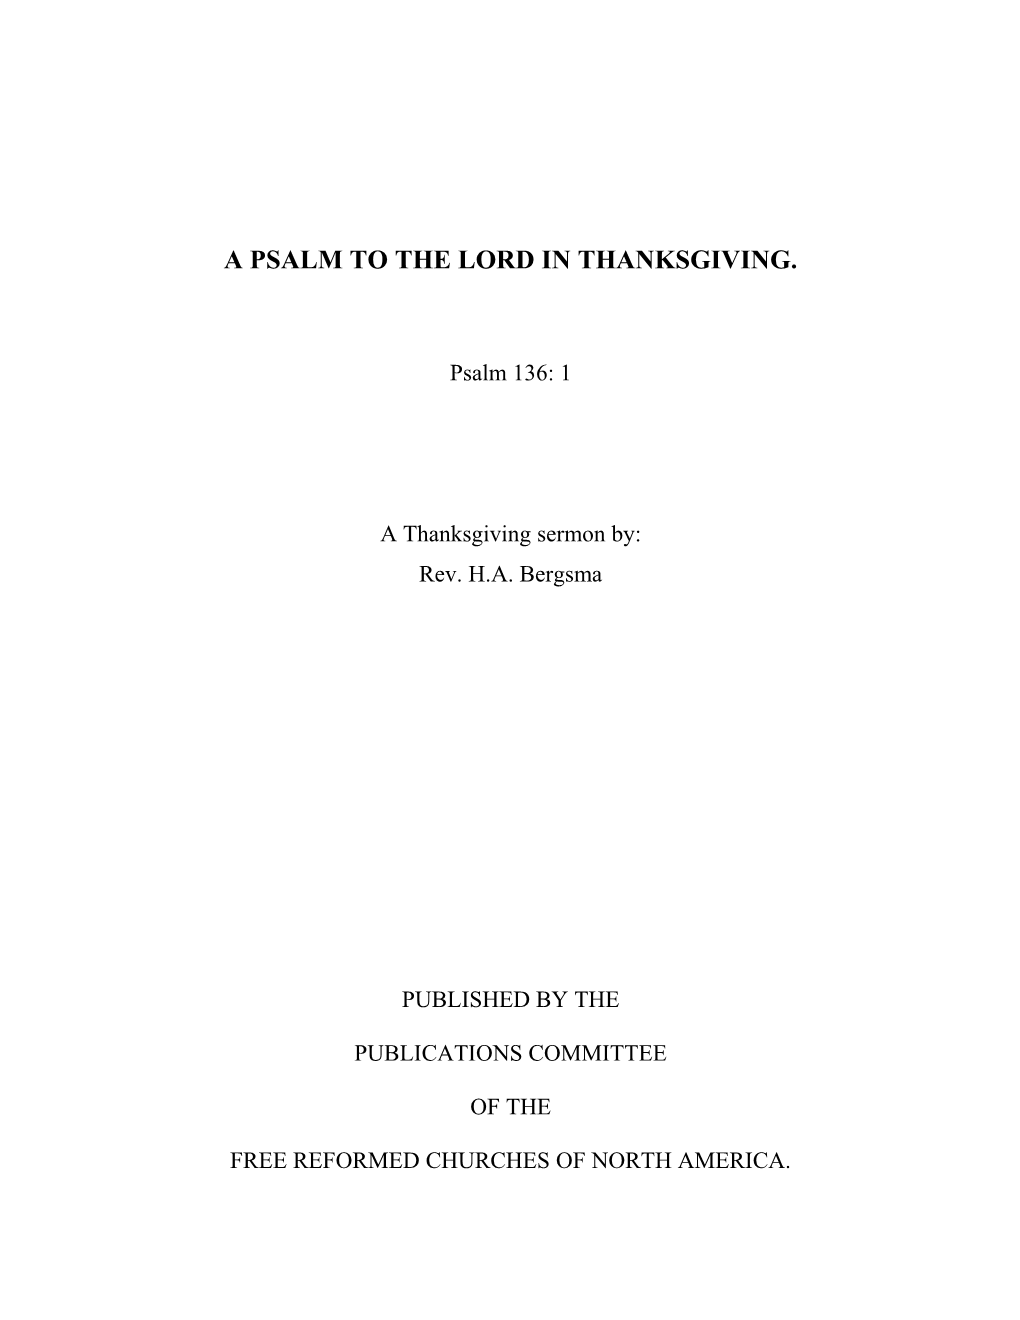 A Psalm to the Lord in Thanksgiving